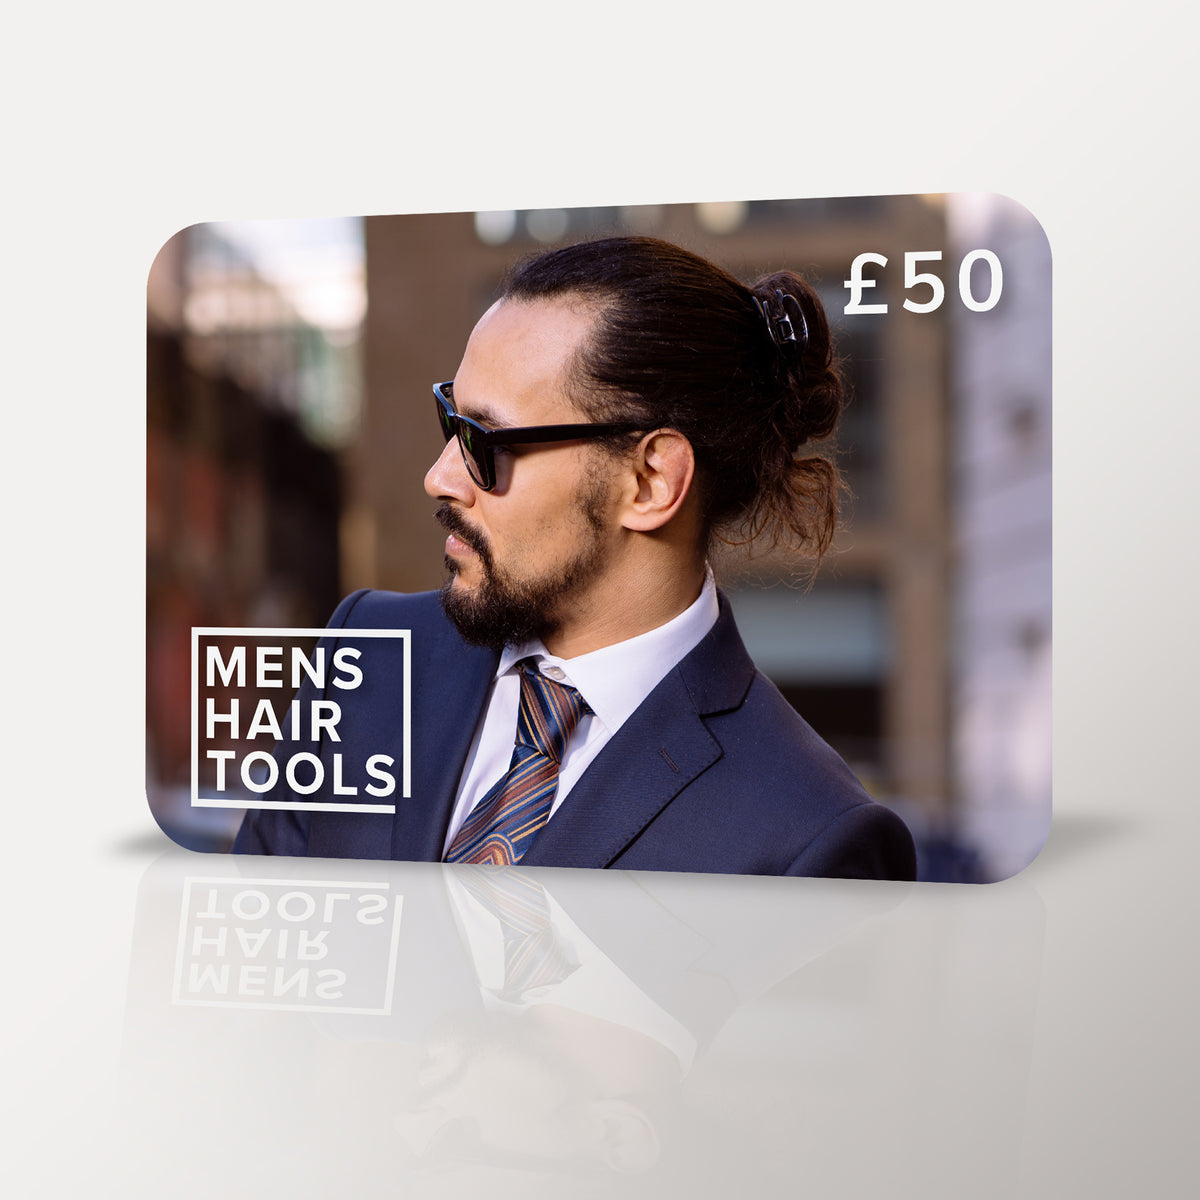 Fifty-Pounds-Mens-Hair-Tools-Gift-Voucher